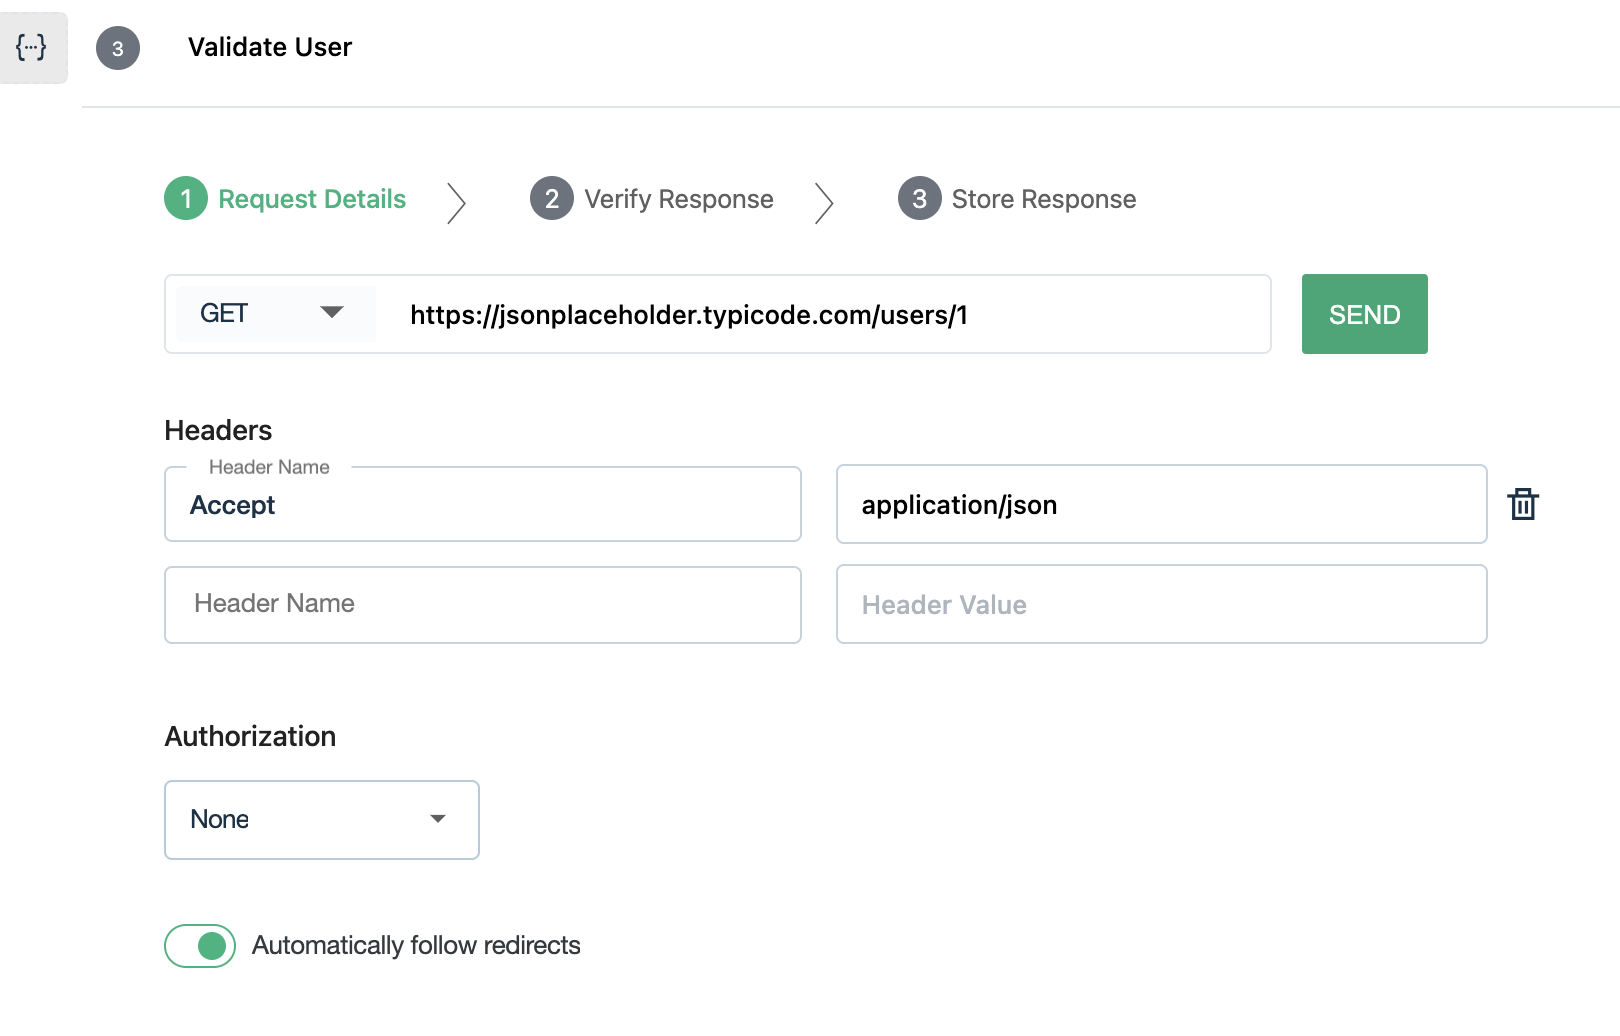 Get request to validate user data